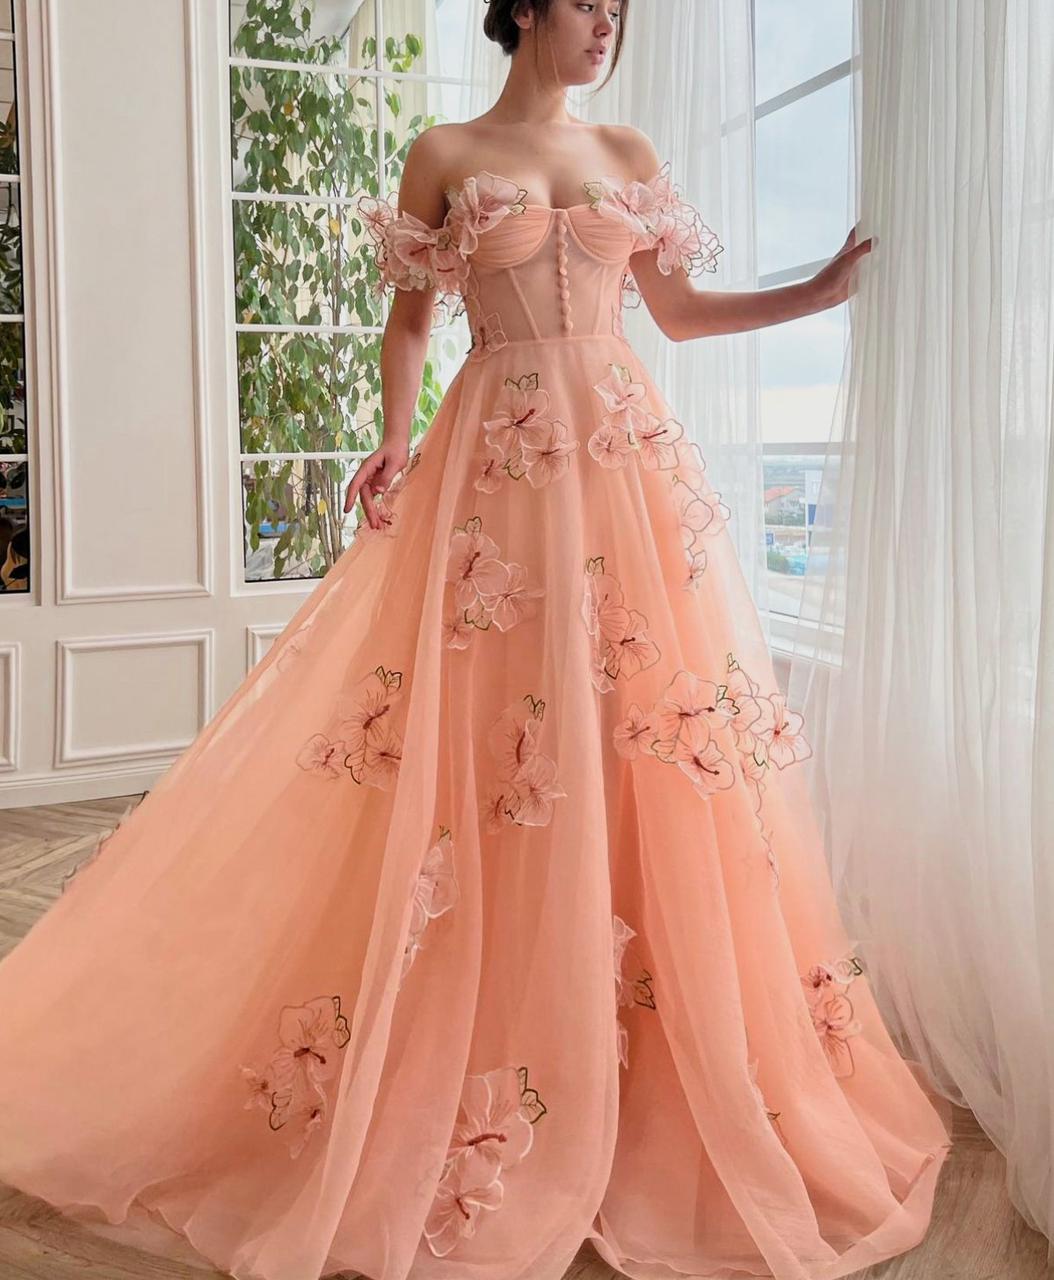 Peach A-Line dress with flowers, embroidery, off the shoulder sleeves and bow straps